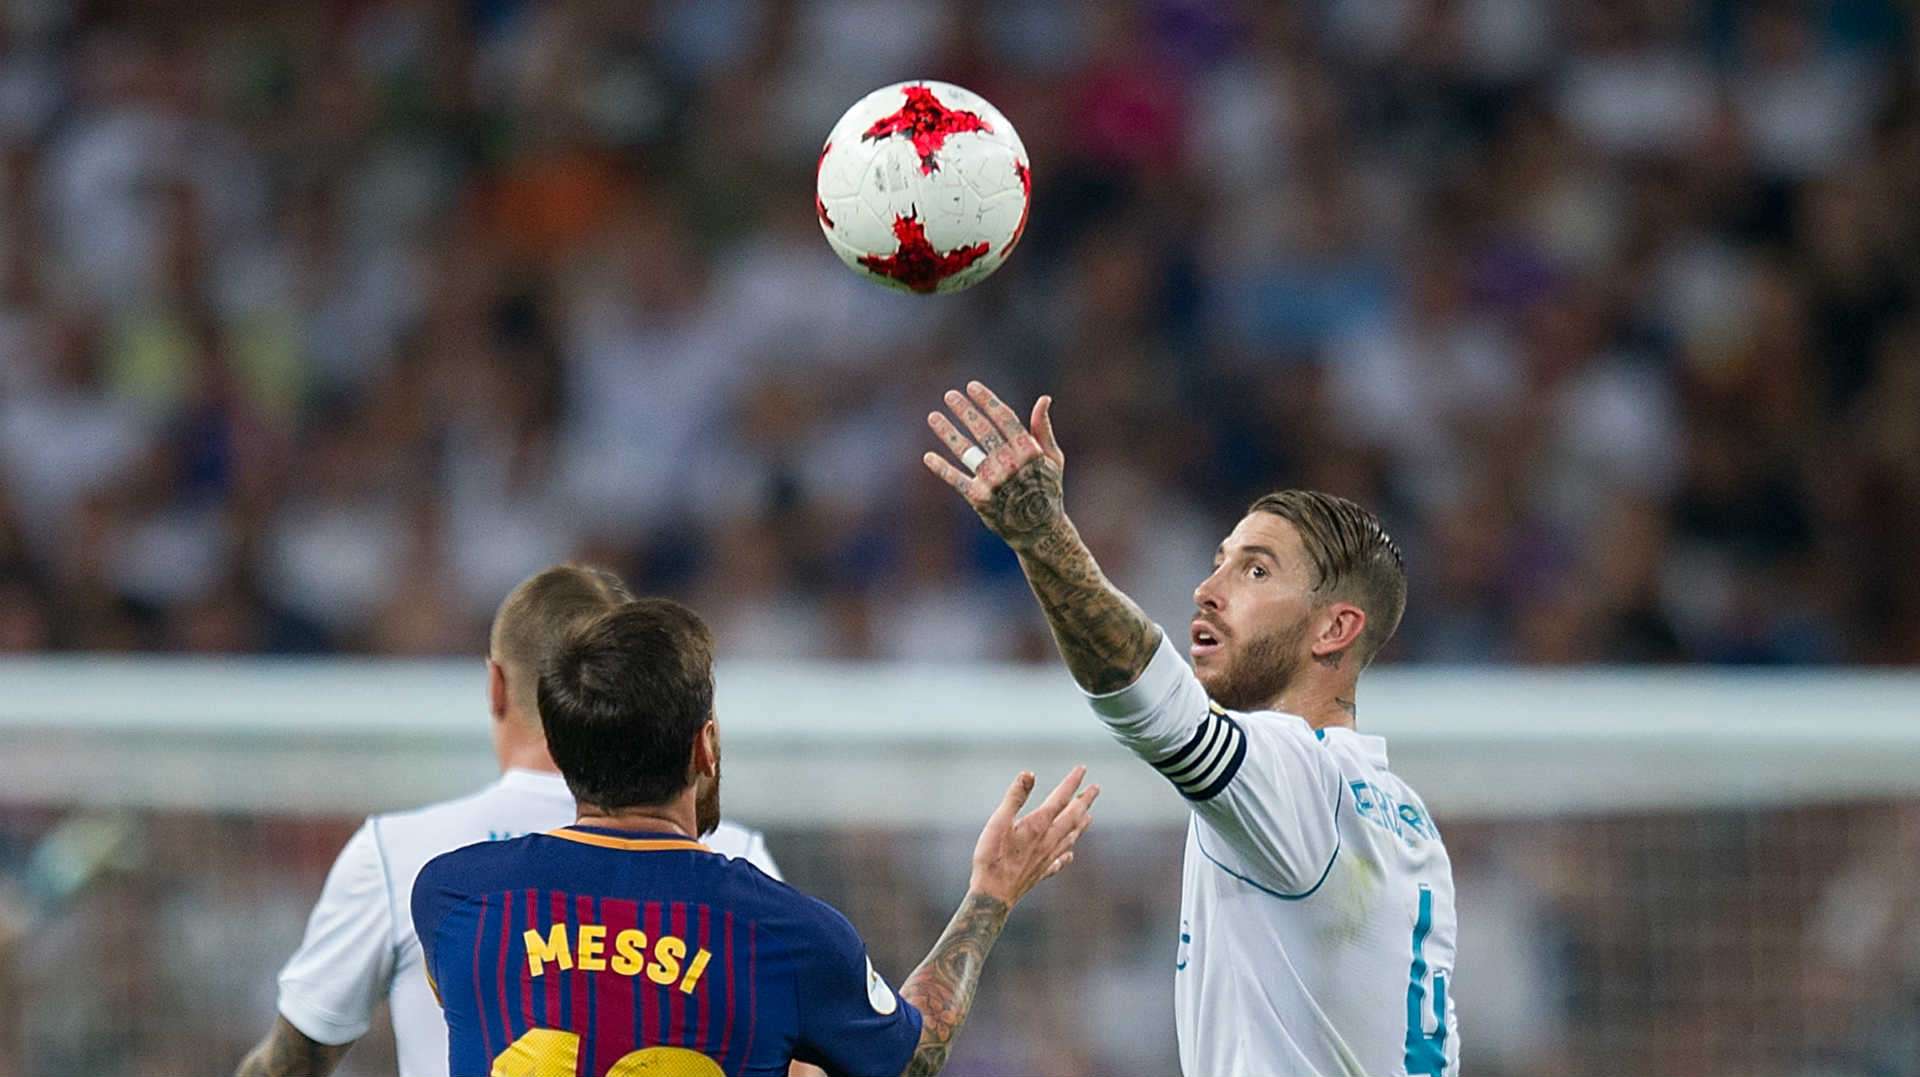 GettyImages-833053052 messi ramos